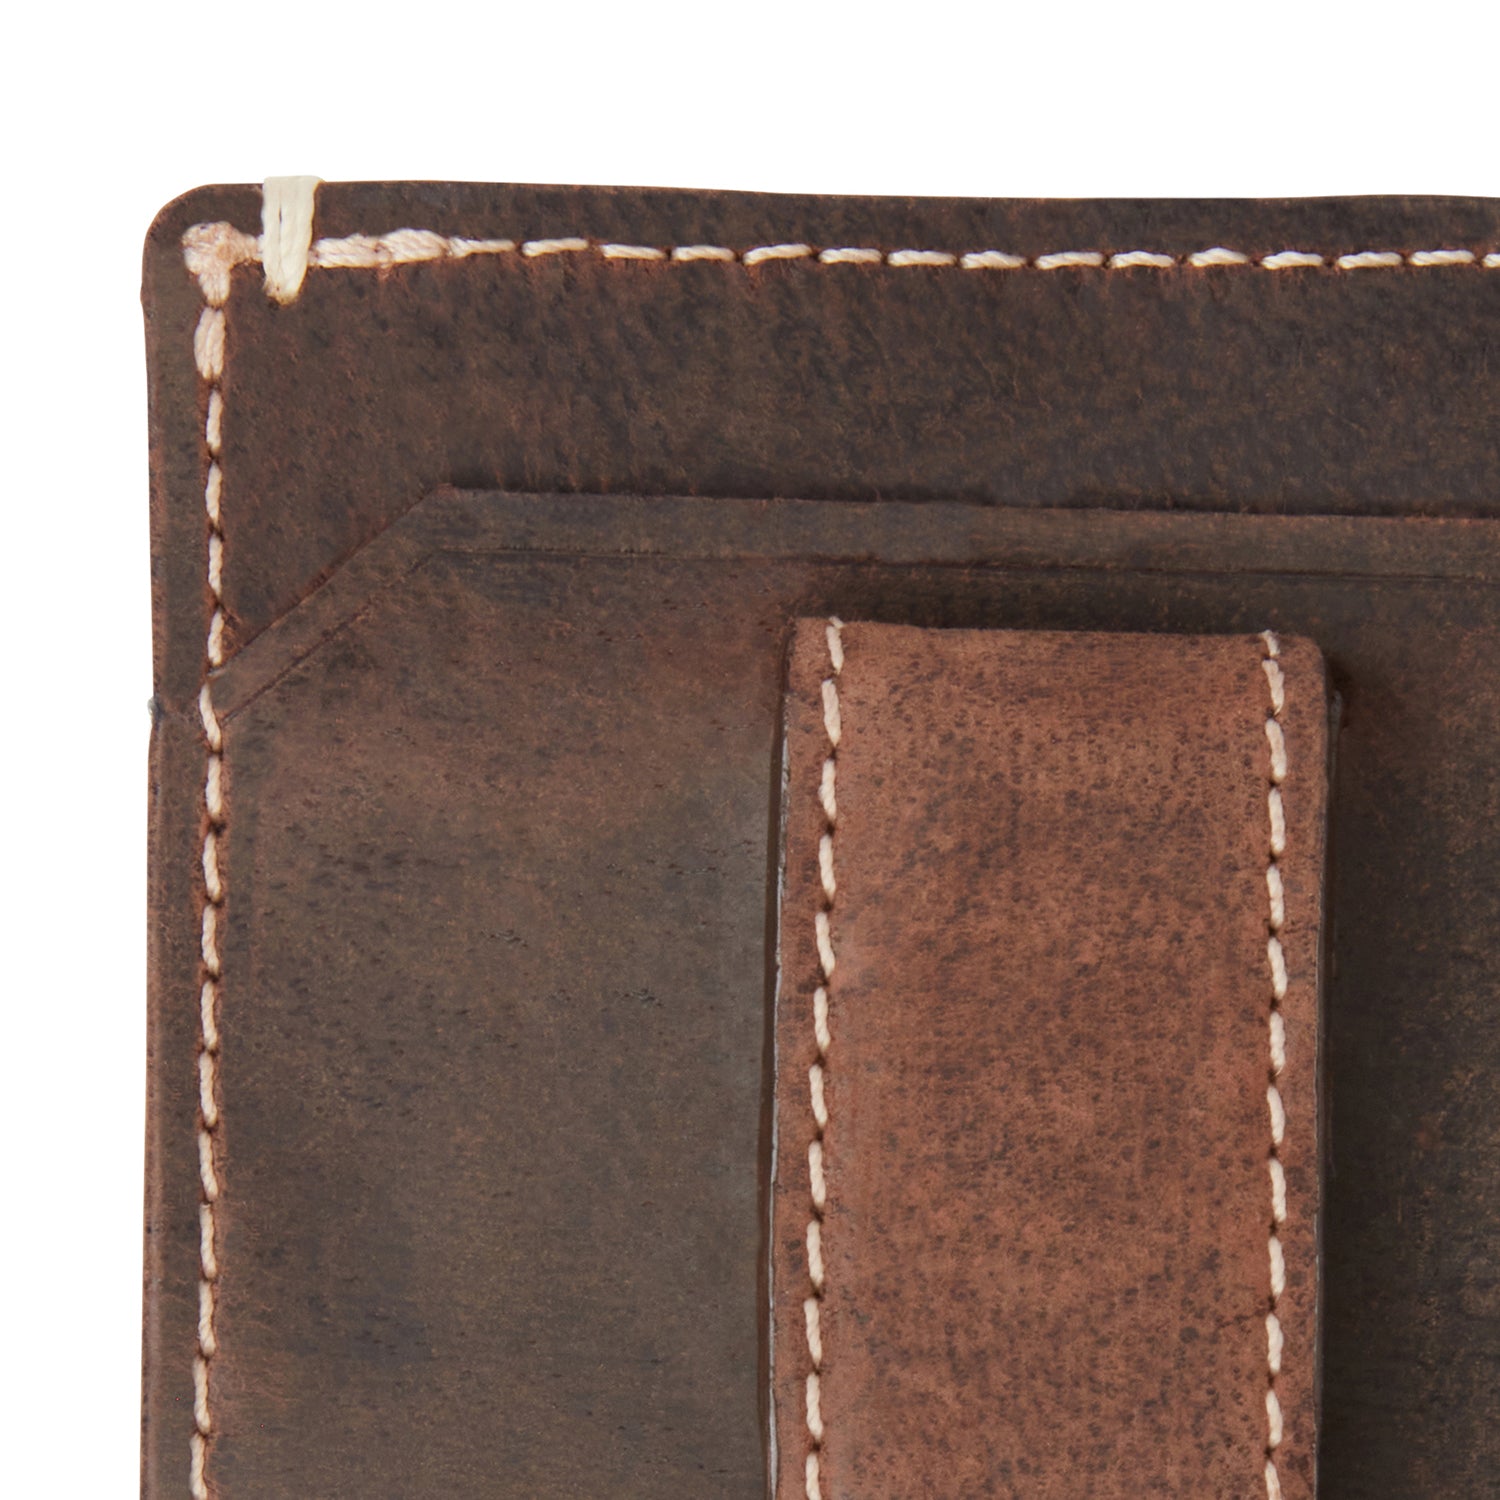 Mad Dog Lucchese Money Clip Card Case